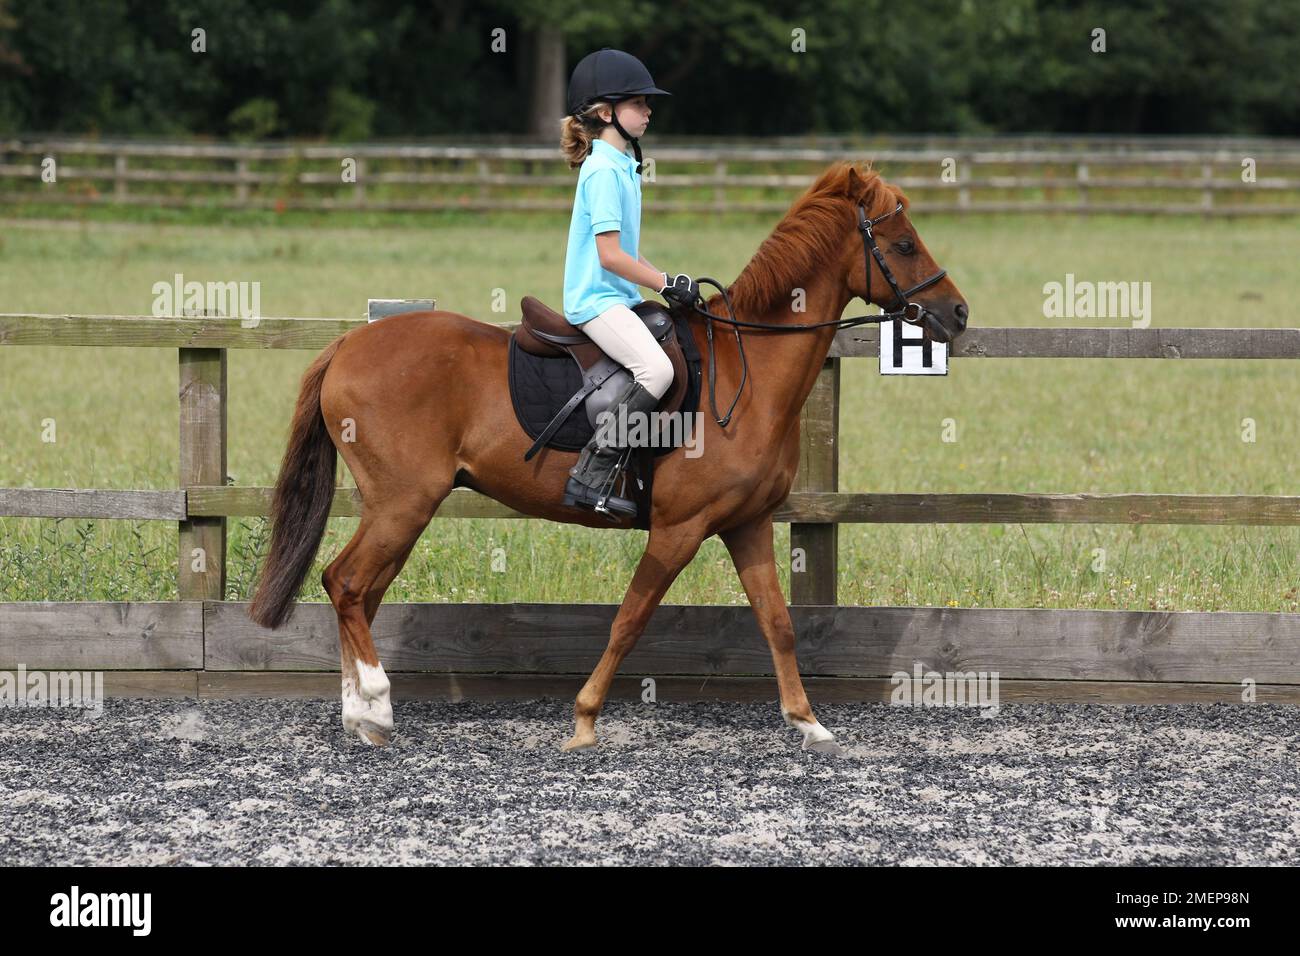 Young girl riding chestnut pony in paddock during riding lesson, side view Stock Photo